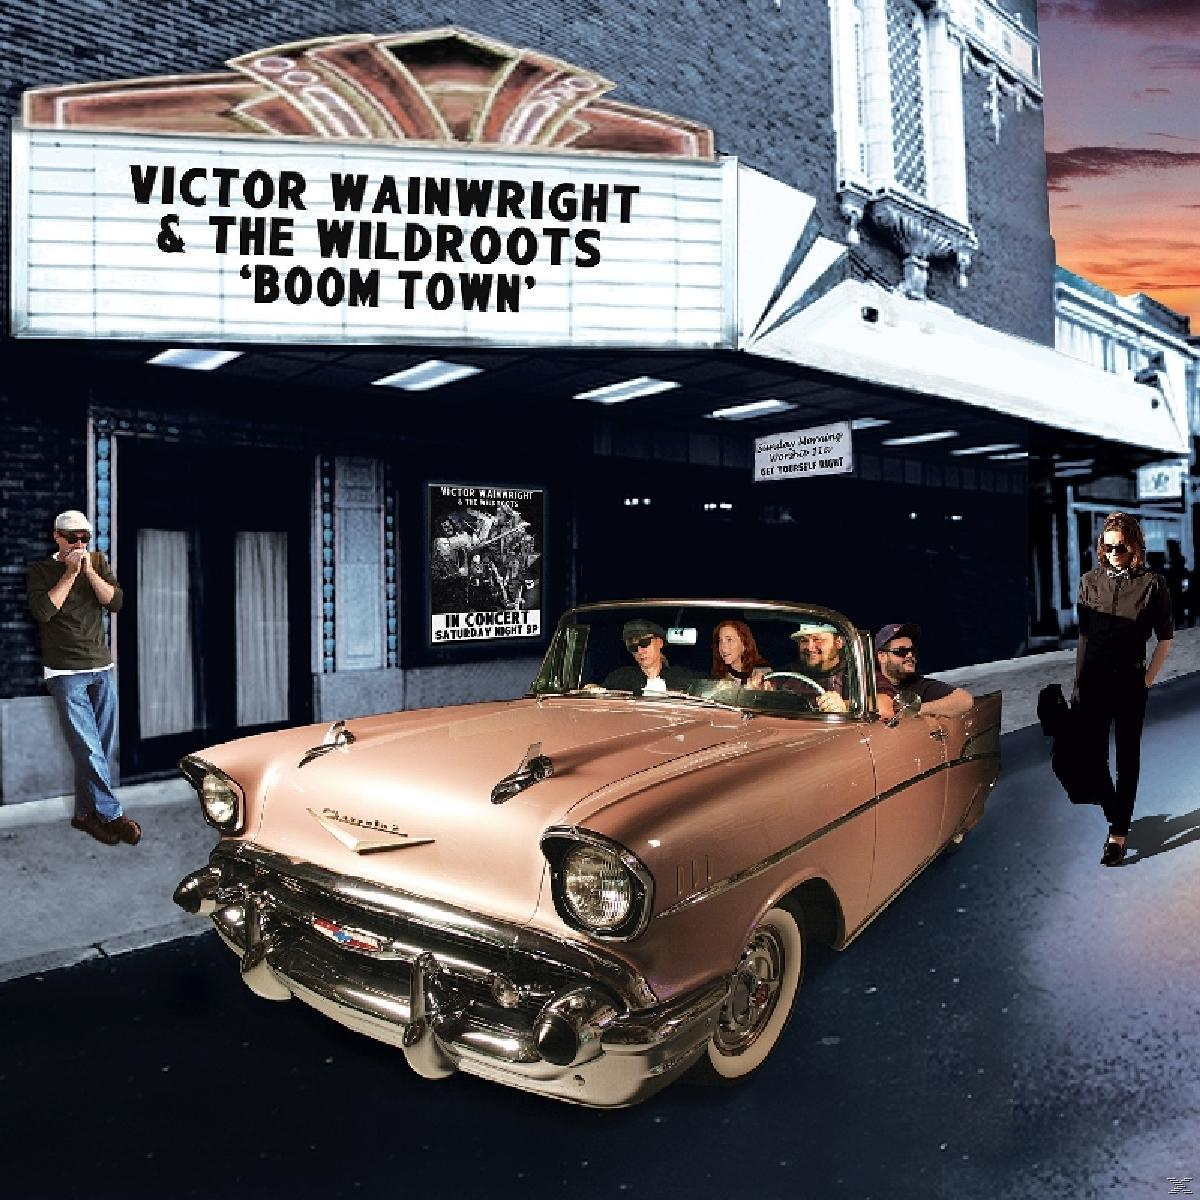 The Wildroots, Victor & The (CD) Town - Wainwright - Boom